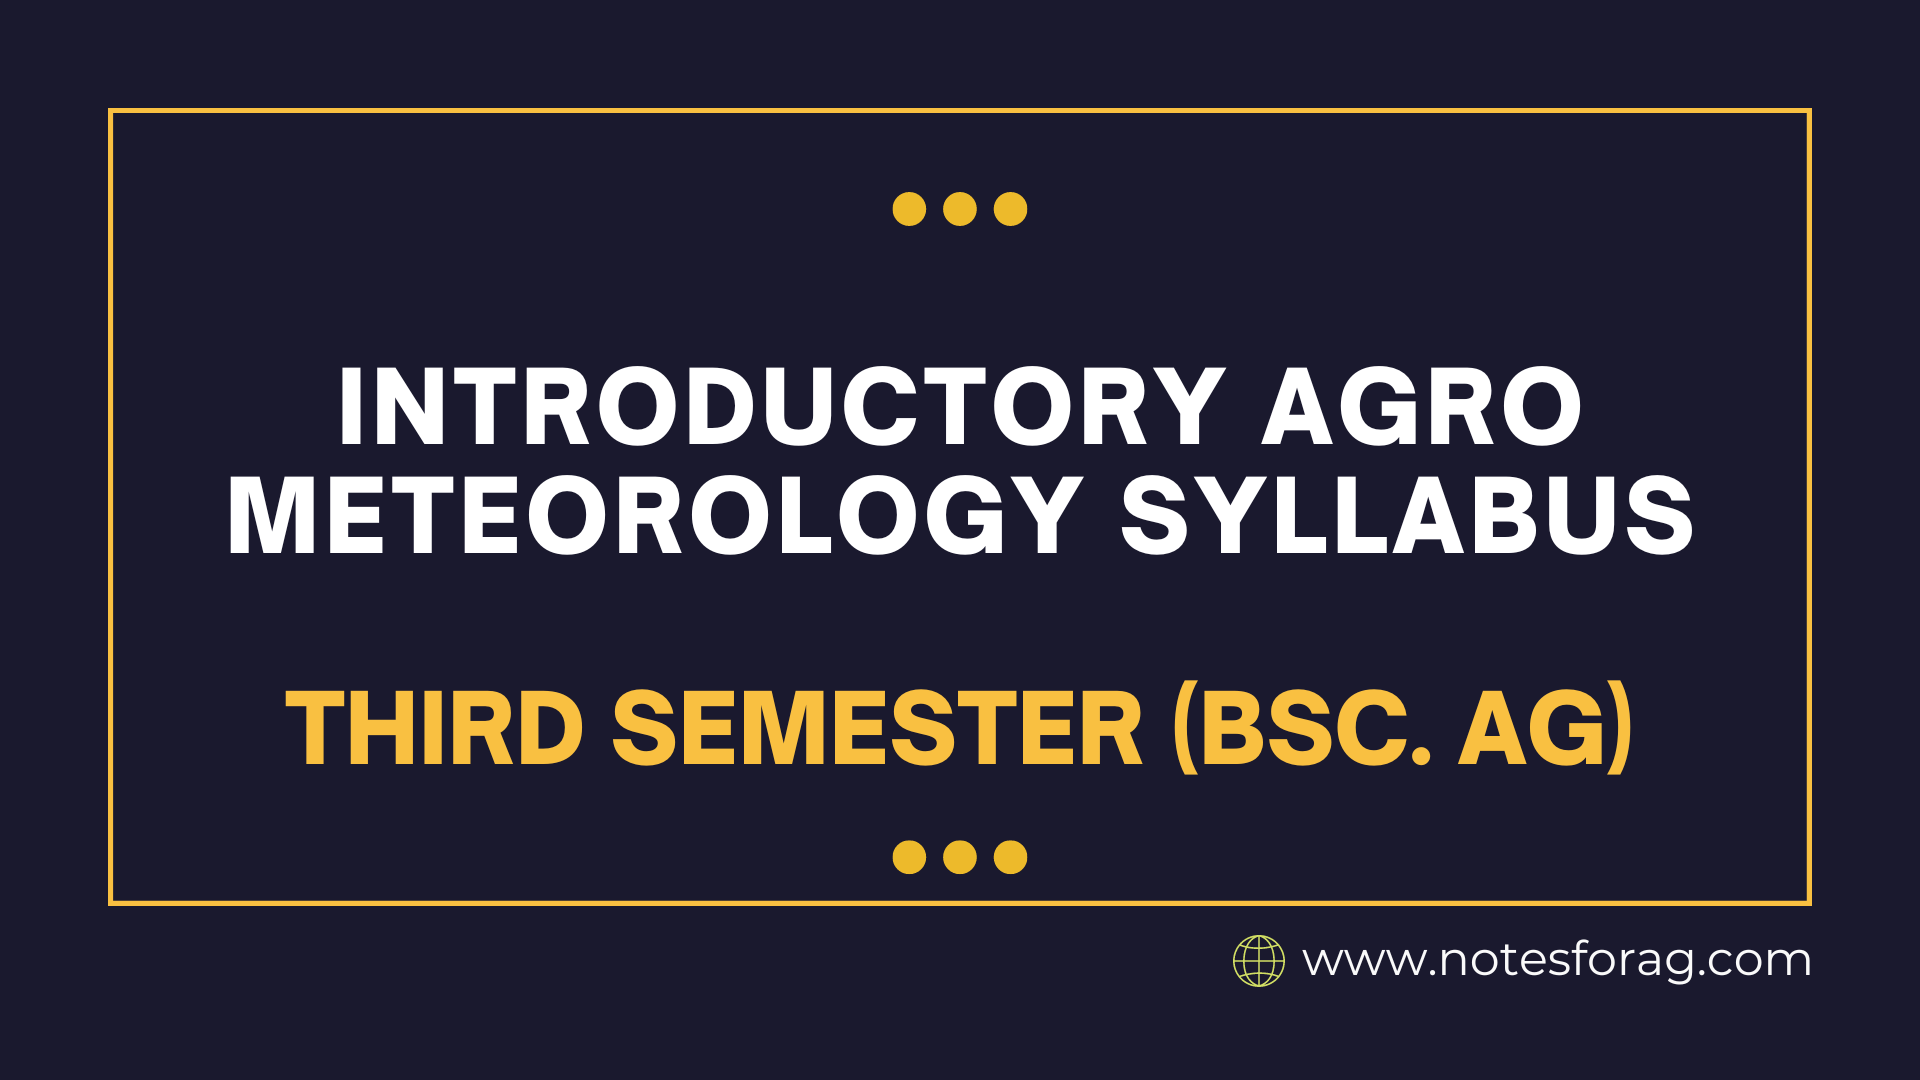 Introductory Agro meteorology Syllabus- Third Semester (BSc.AG)